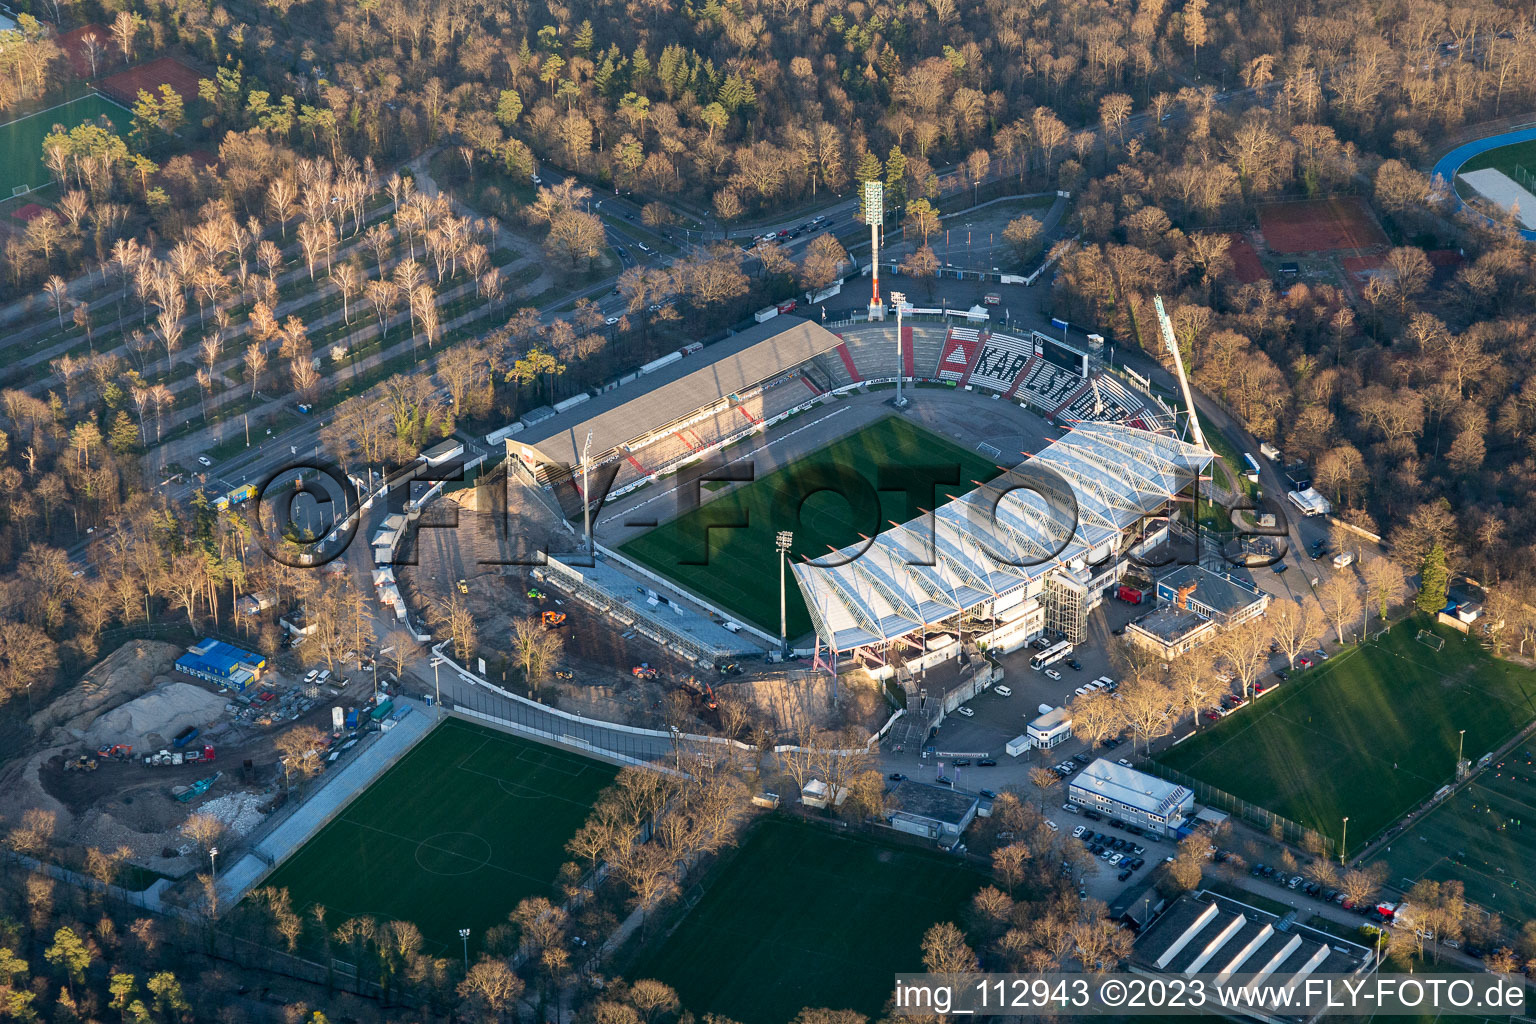 Extension and conversion site on the sports ground of the stadium "Wildparkstadion" of the KSC in Karlsruhe in the state Baden-Wurttemberg, Germany